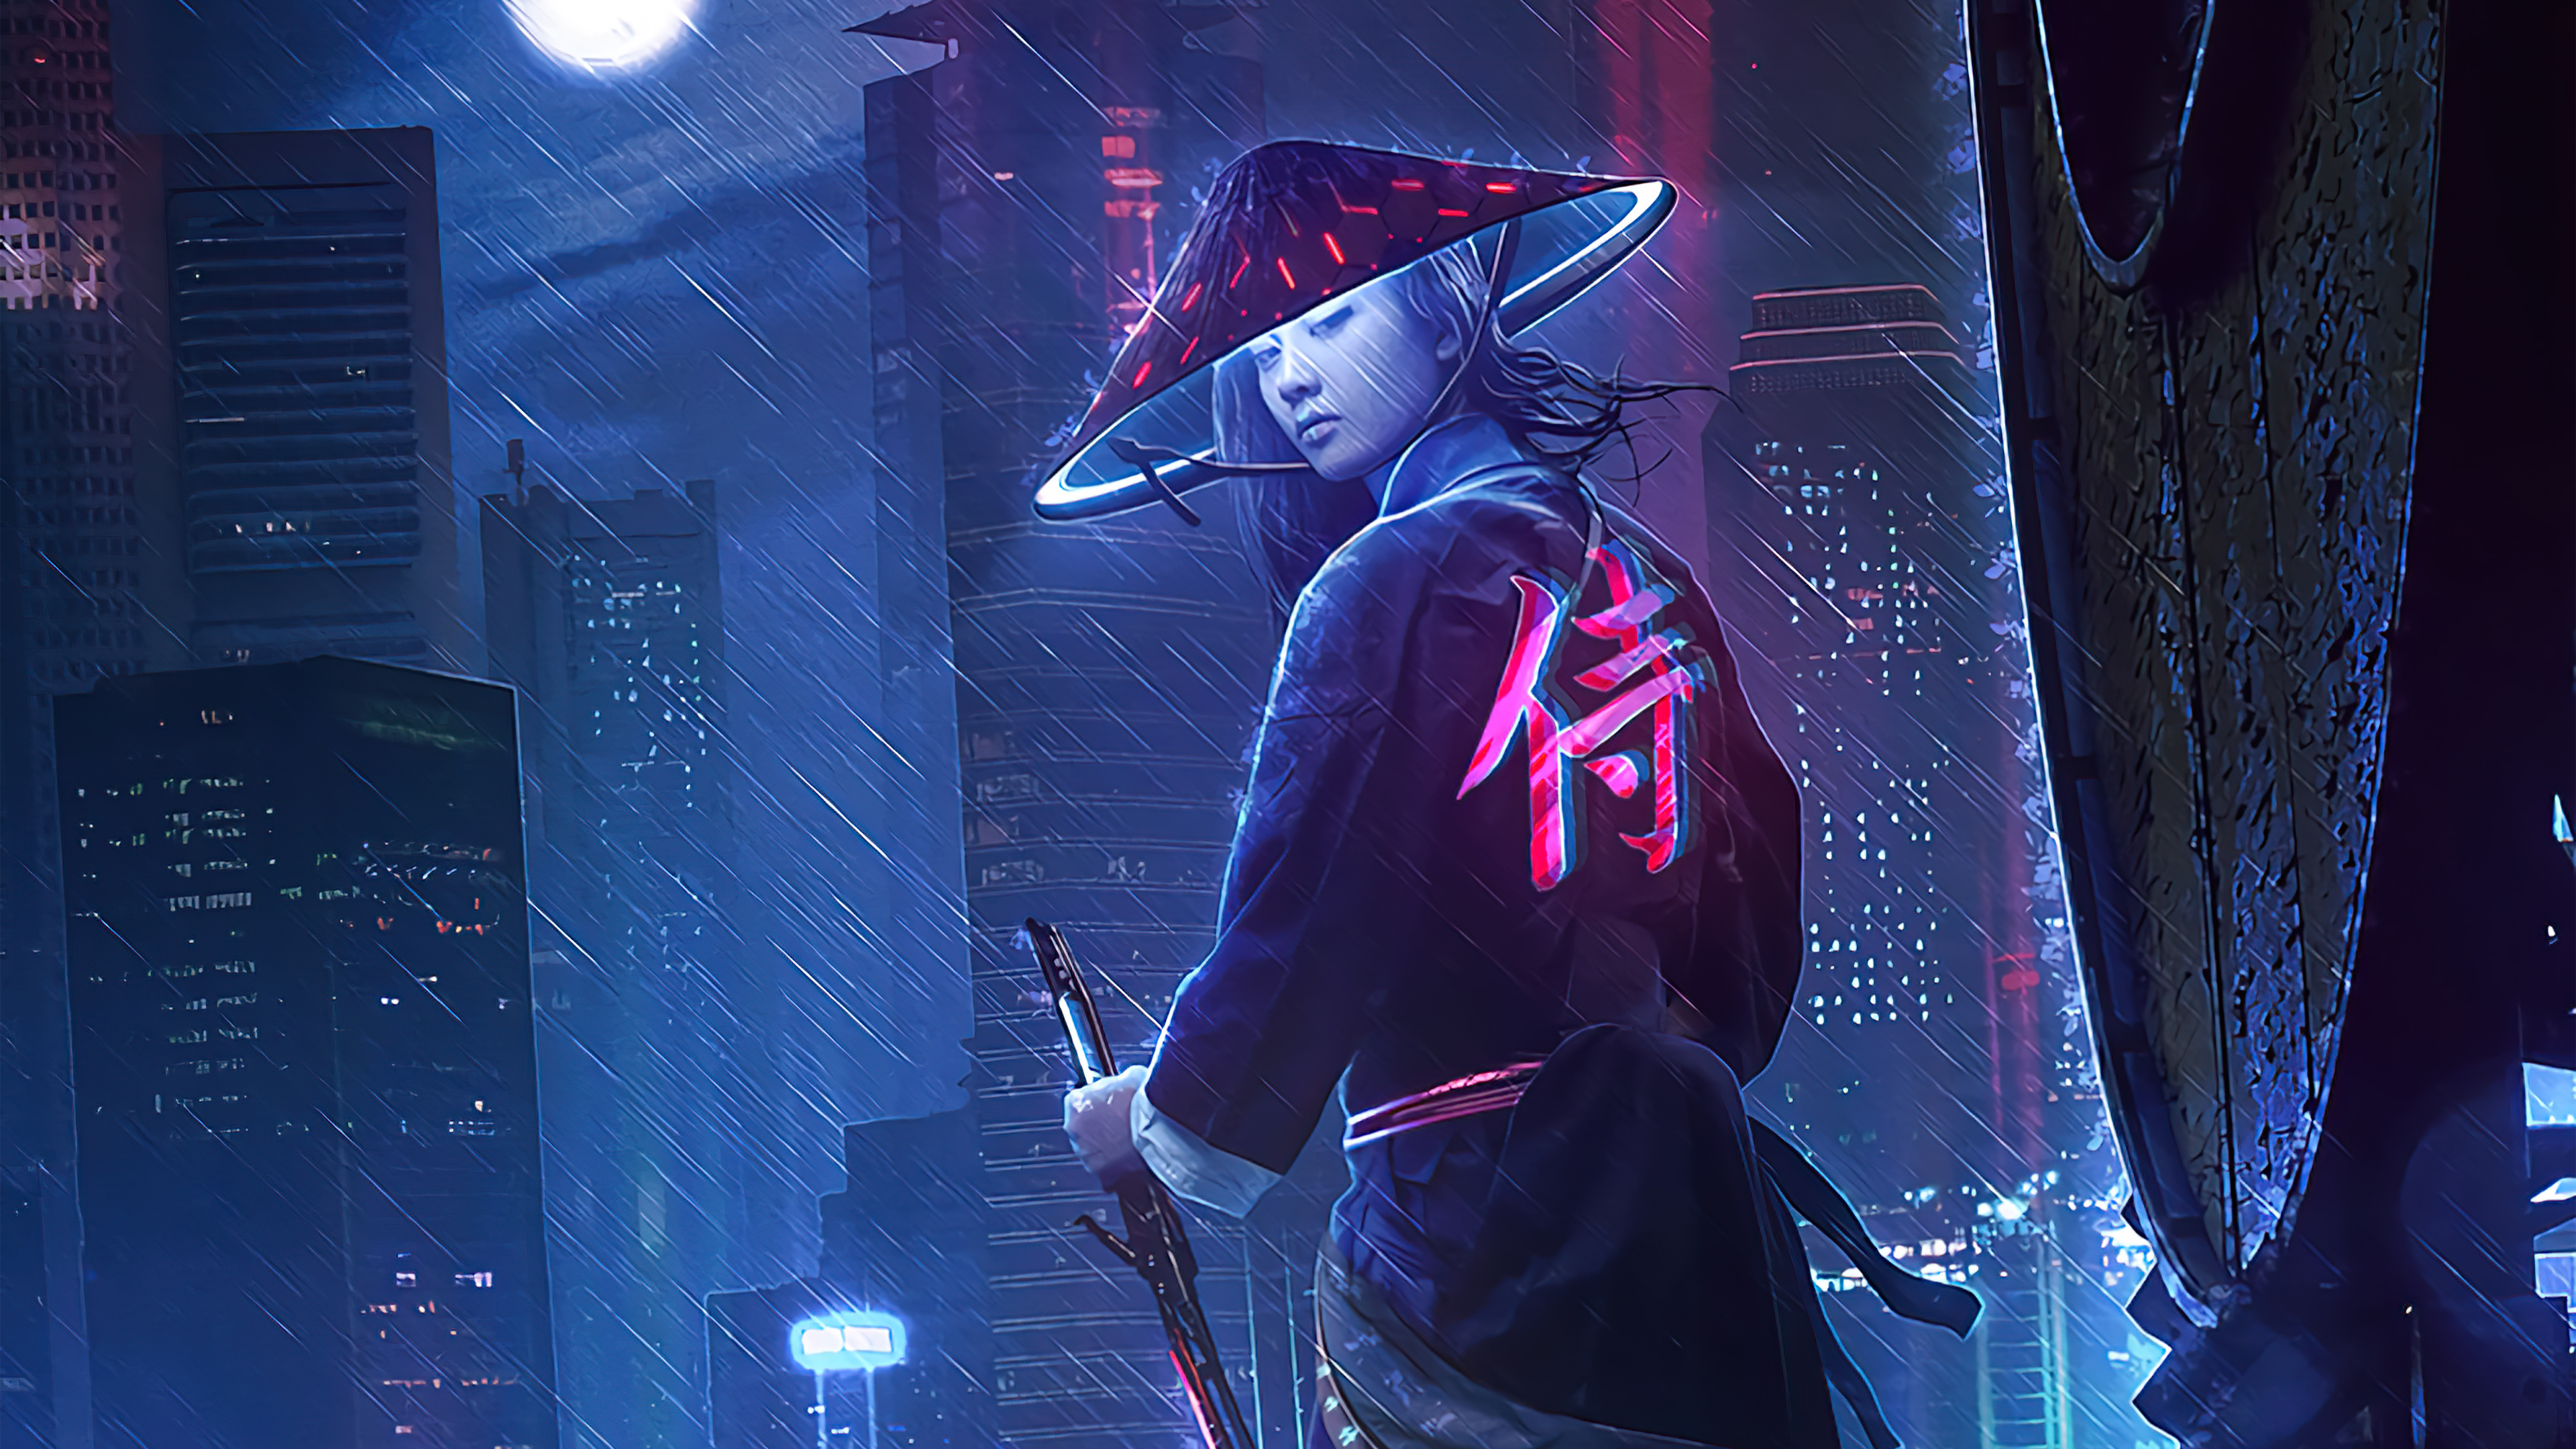 Neon Samurai Girl 4k iPad Air HD 4k Wallpaper, Image, Background, Photo and Picture